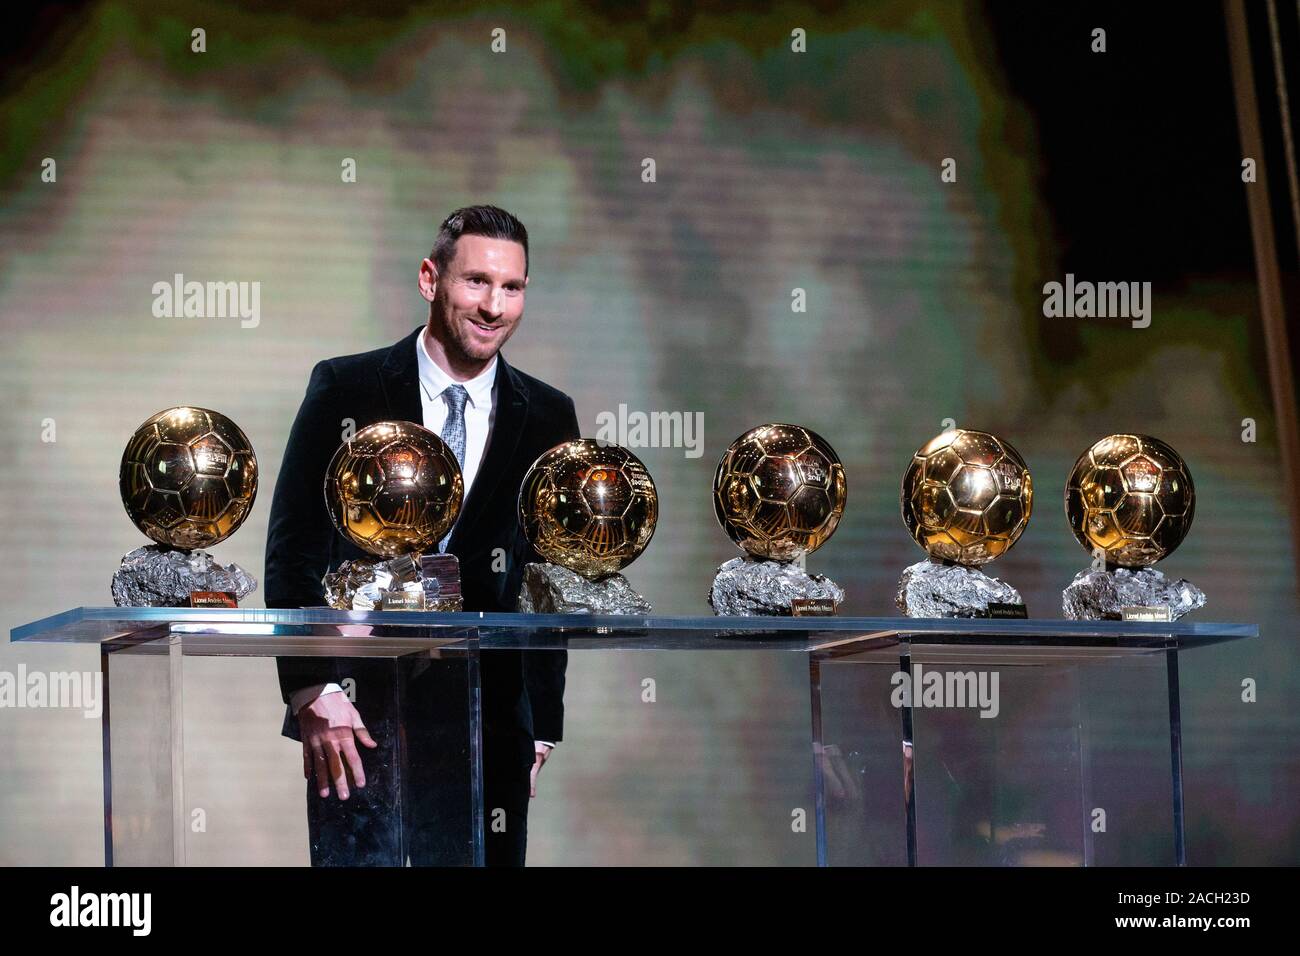 Paris, France. 2nd Dec, 2019. Barcelona's Argentinian forward Lionel Messi  poses with the trophies during the Ballon d'Or 2019 awards ceremony at the  Theatre du Chatelet in Paris, France, Dec. 2, 2019.